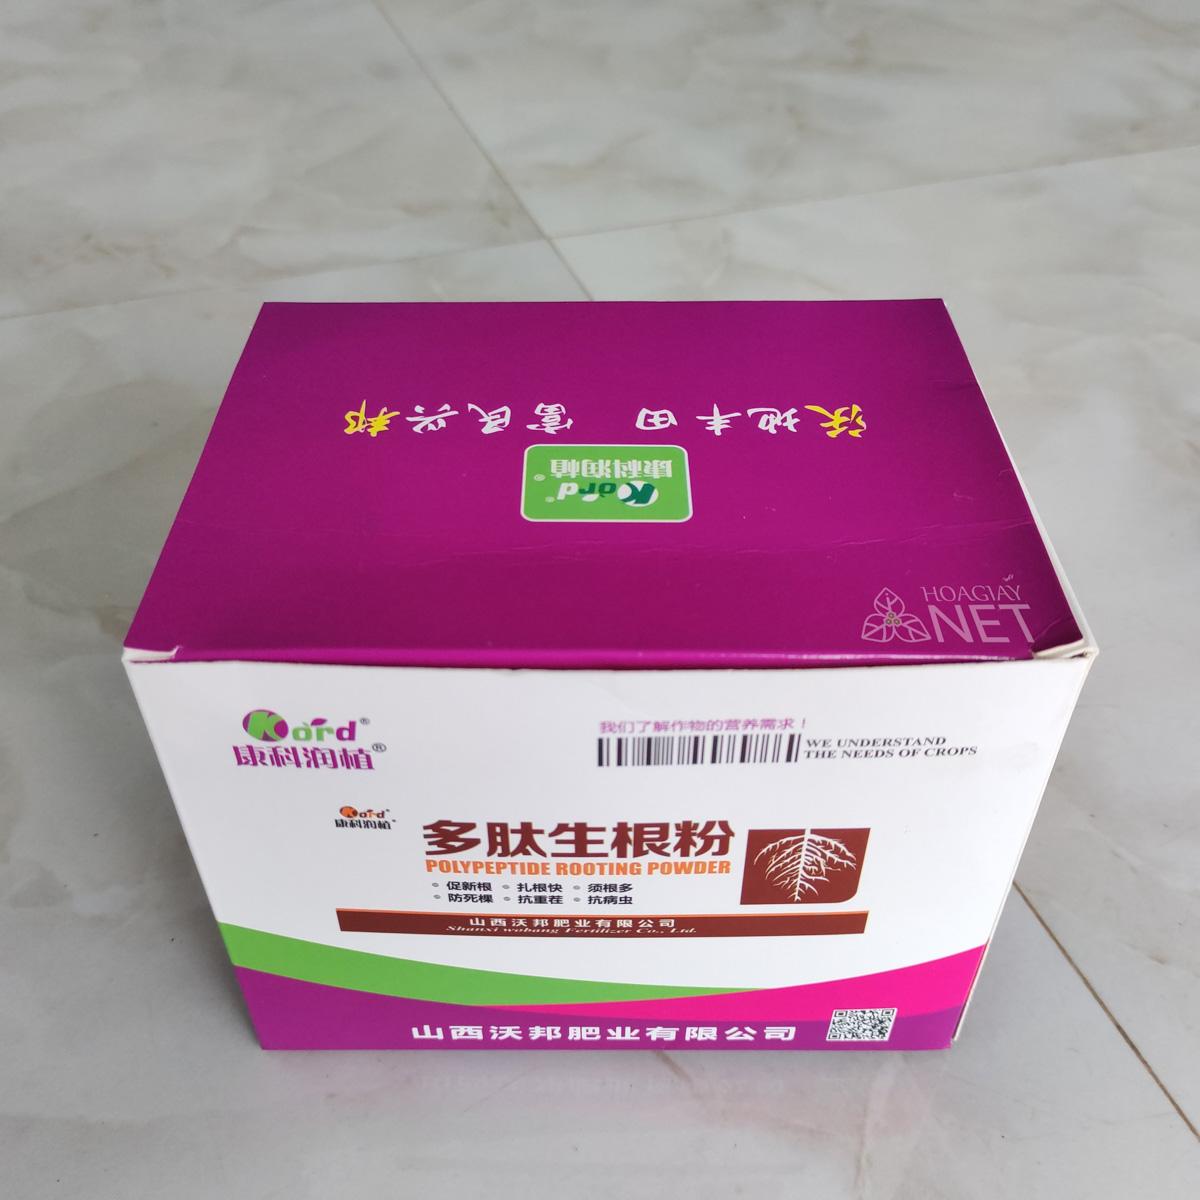 hộp thuốc kích rễ polypeptide rooting powder